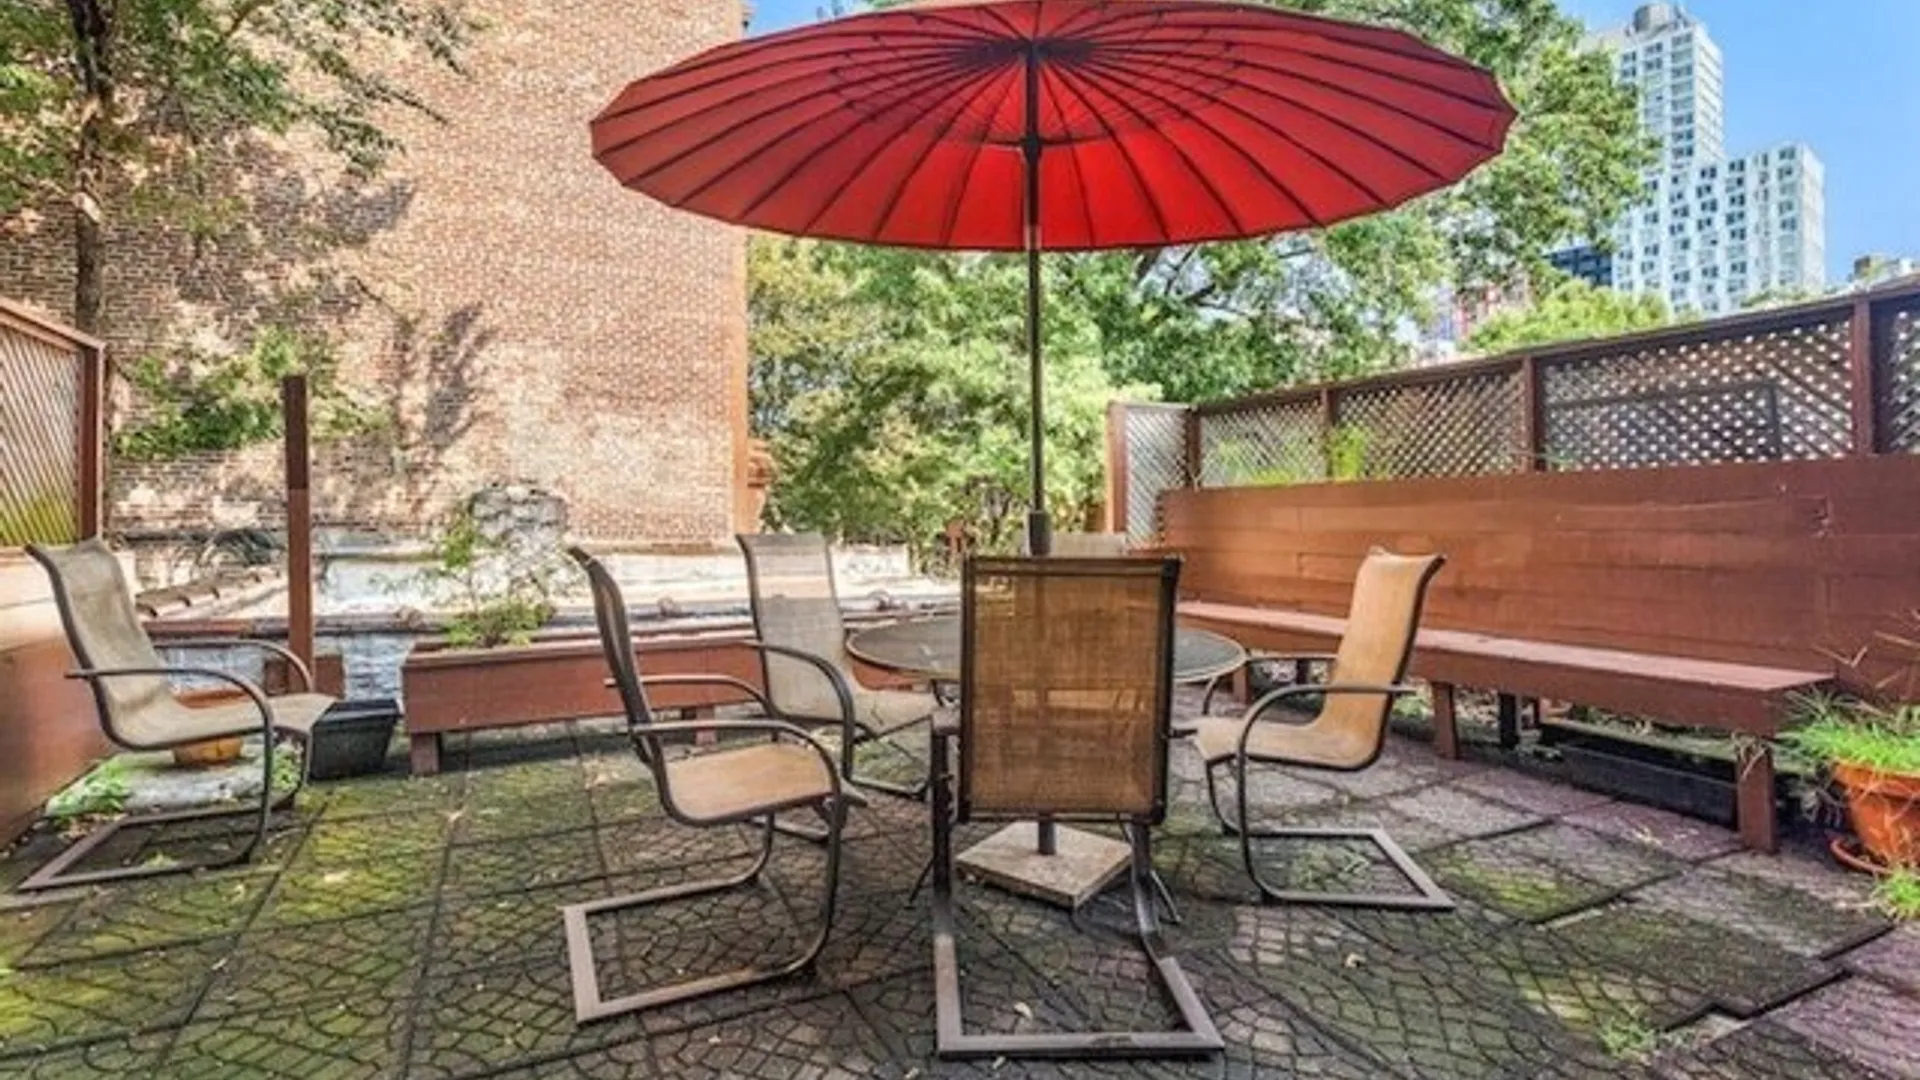 Almost New Vintage, 68 Saint Marks Avenue, New York, NY 11217, USA | 1 bed house for rent